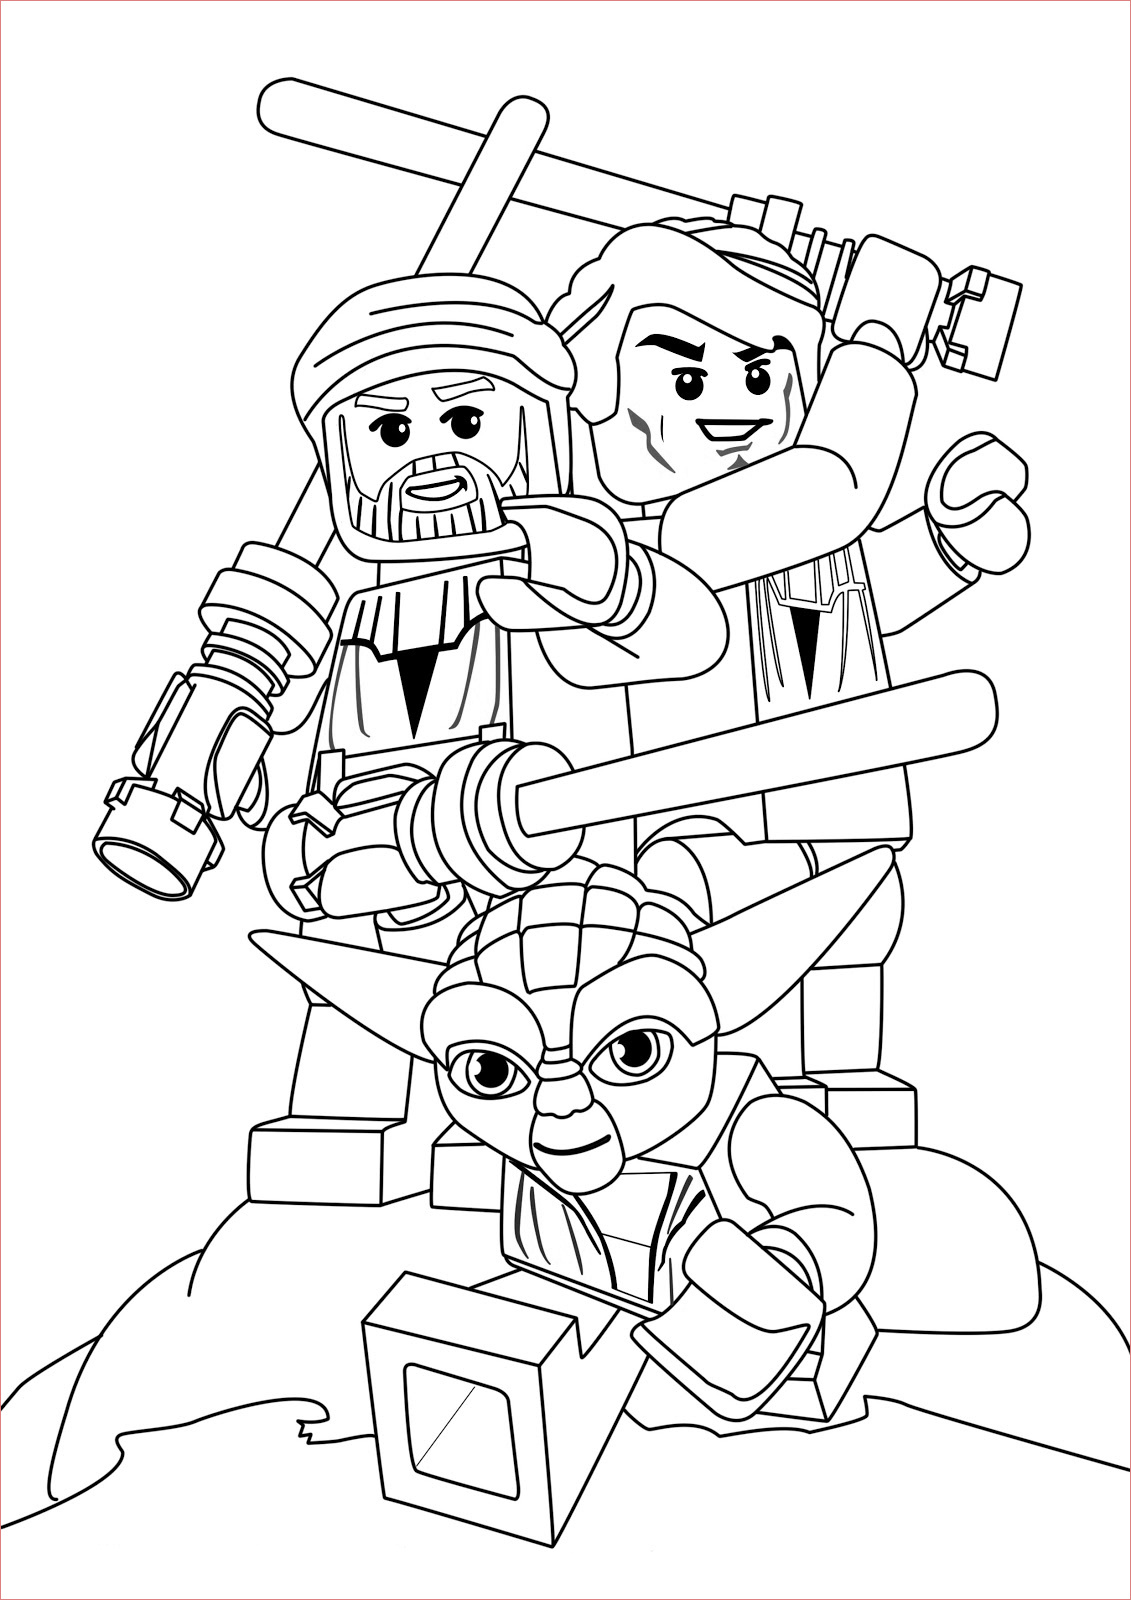 Coloriage Starwars Génial Lego Star Wars Coloring Pages Best Coloring Pages for Kids